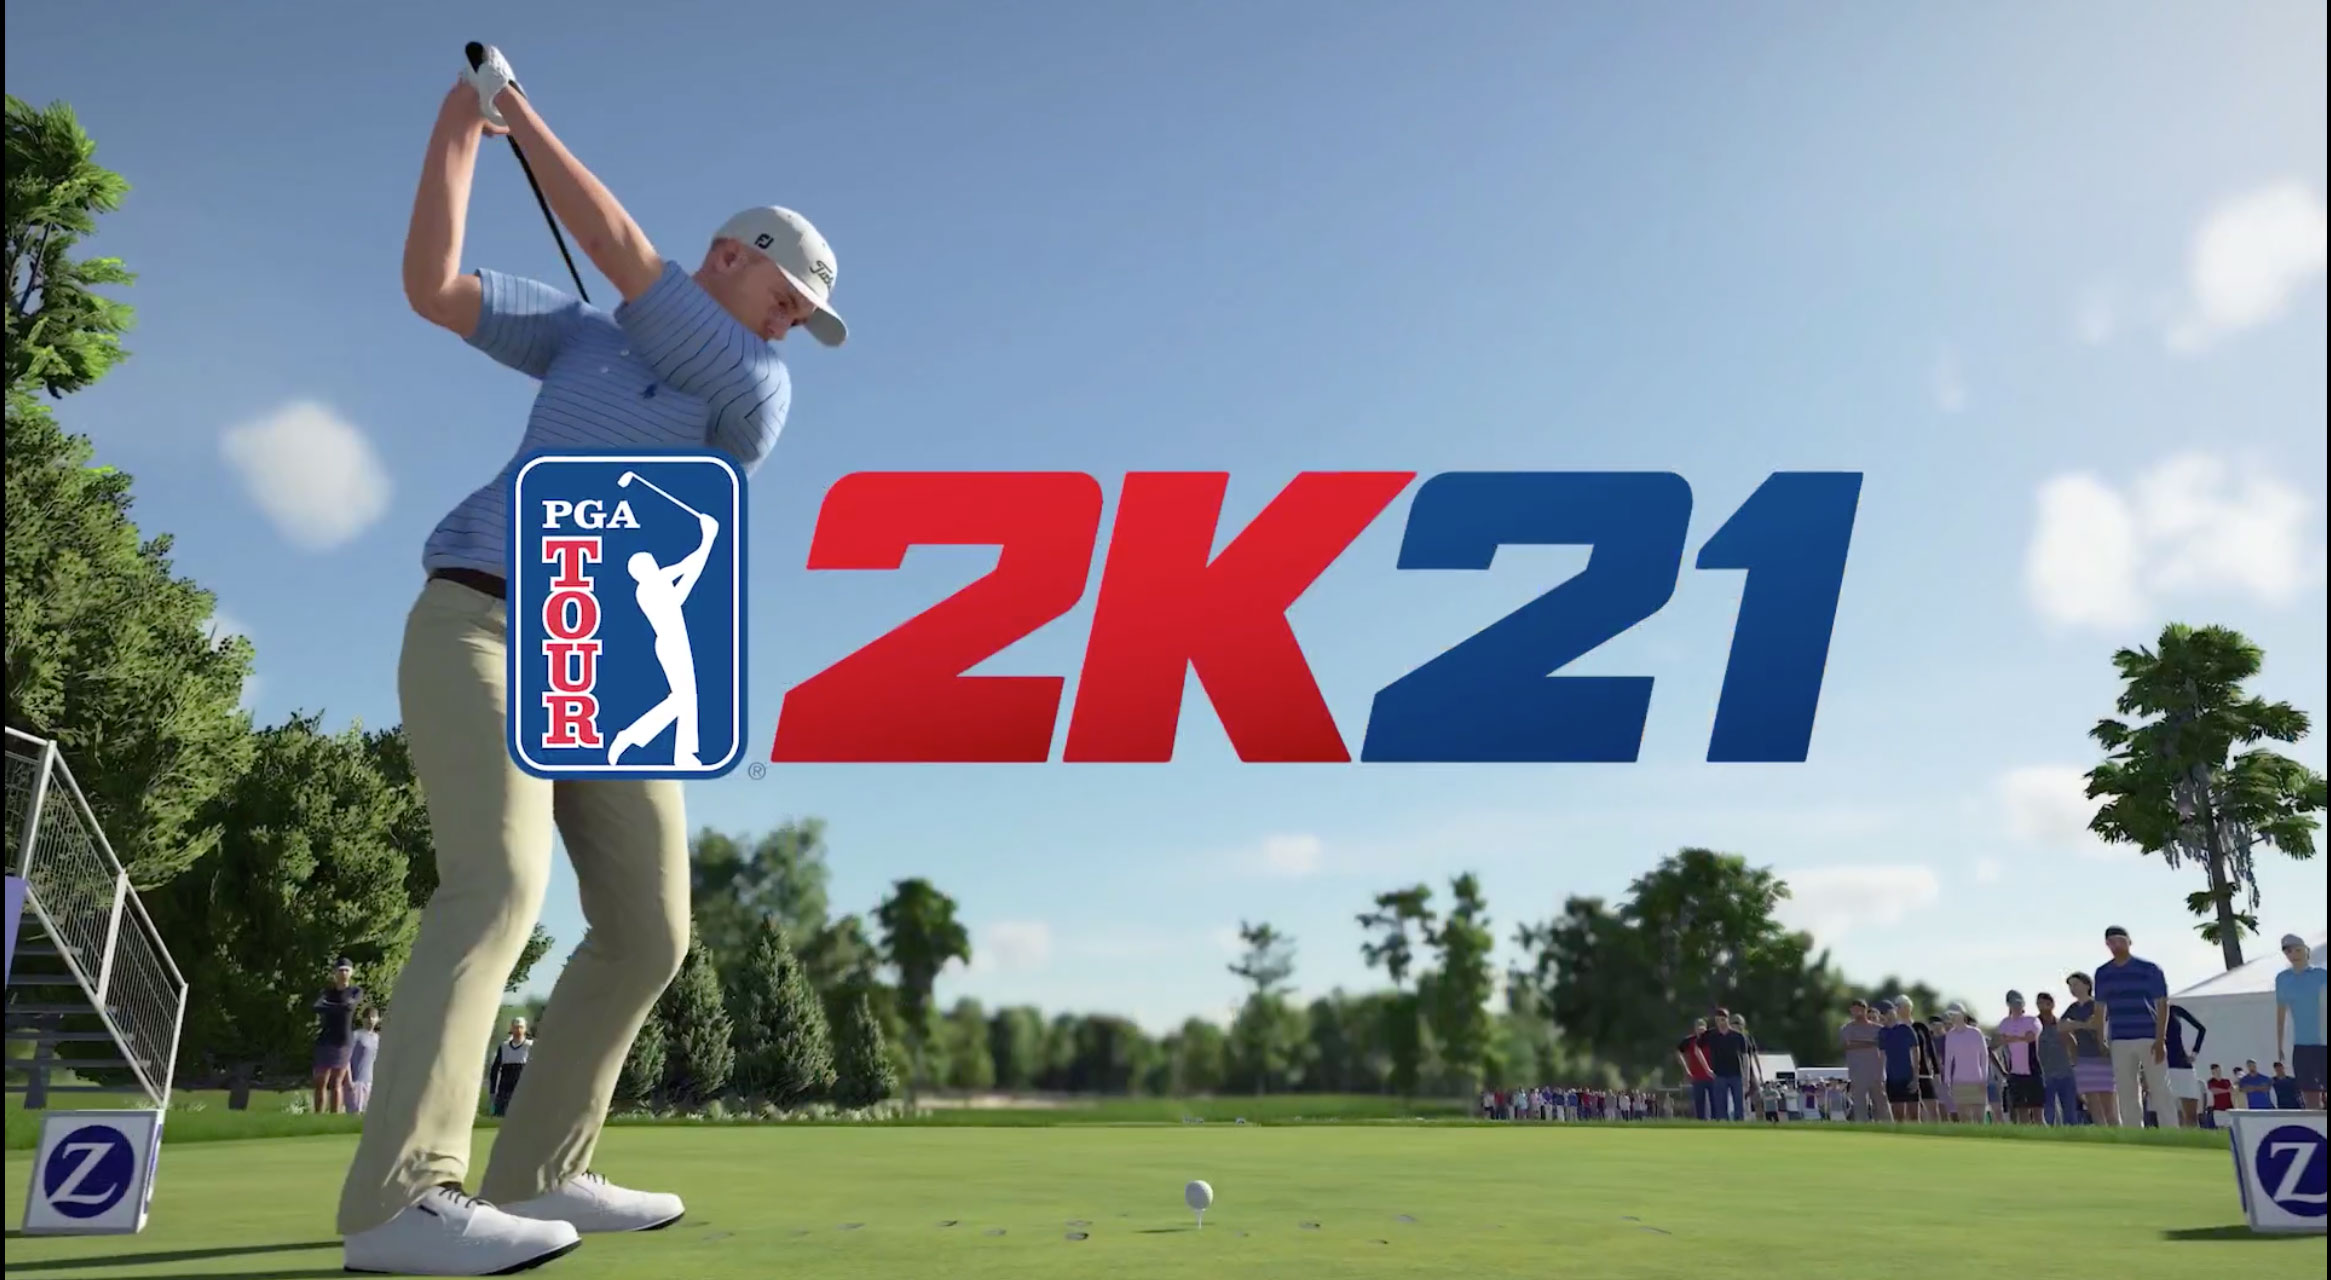 PGA Tour 2K21 Version 1.1.0.0 now available, patch notes revealed The